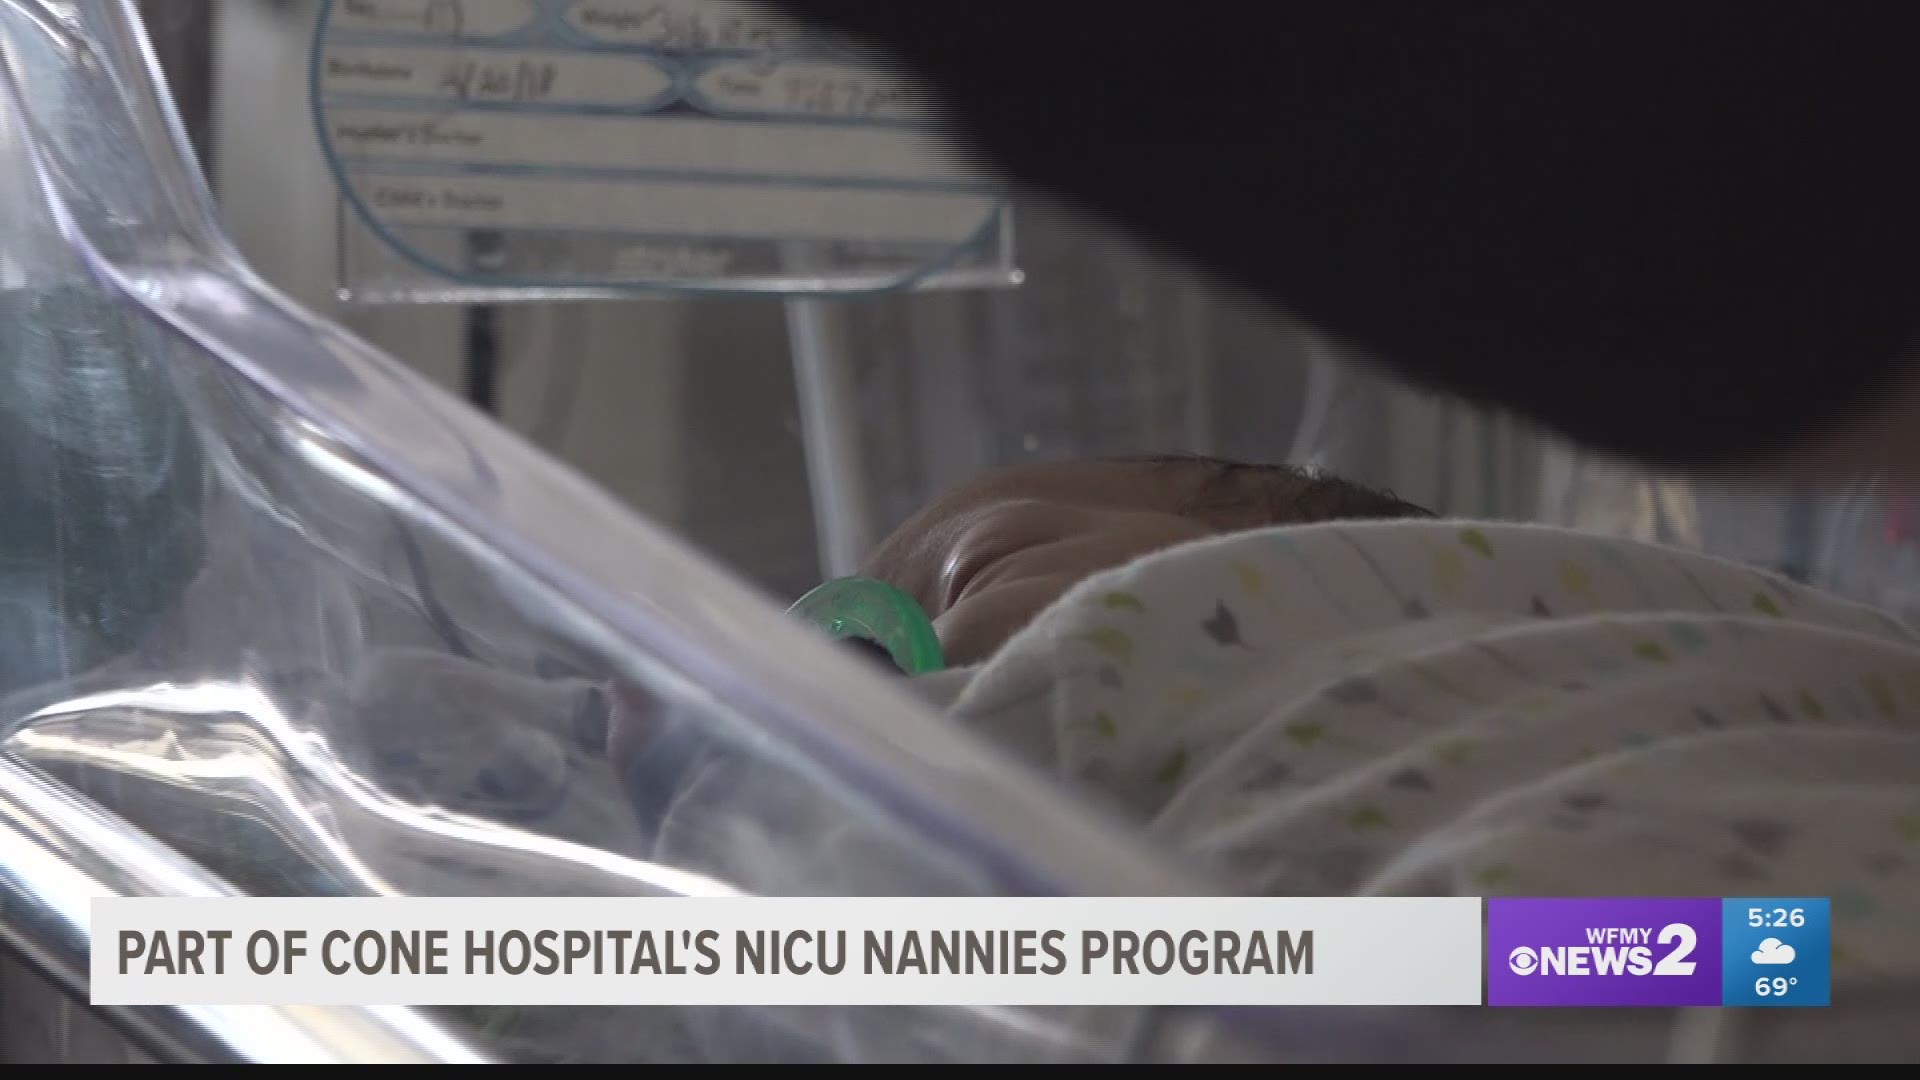 Ron Simpson, a Vietnam Veteran and grandfather of five, is the first man in the hospital's NICU Nannies Program.